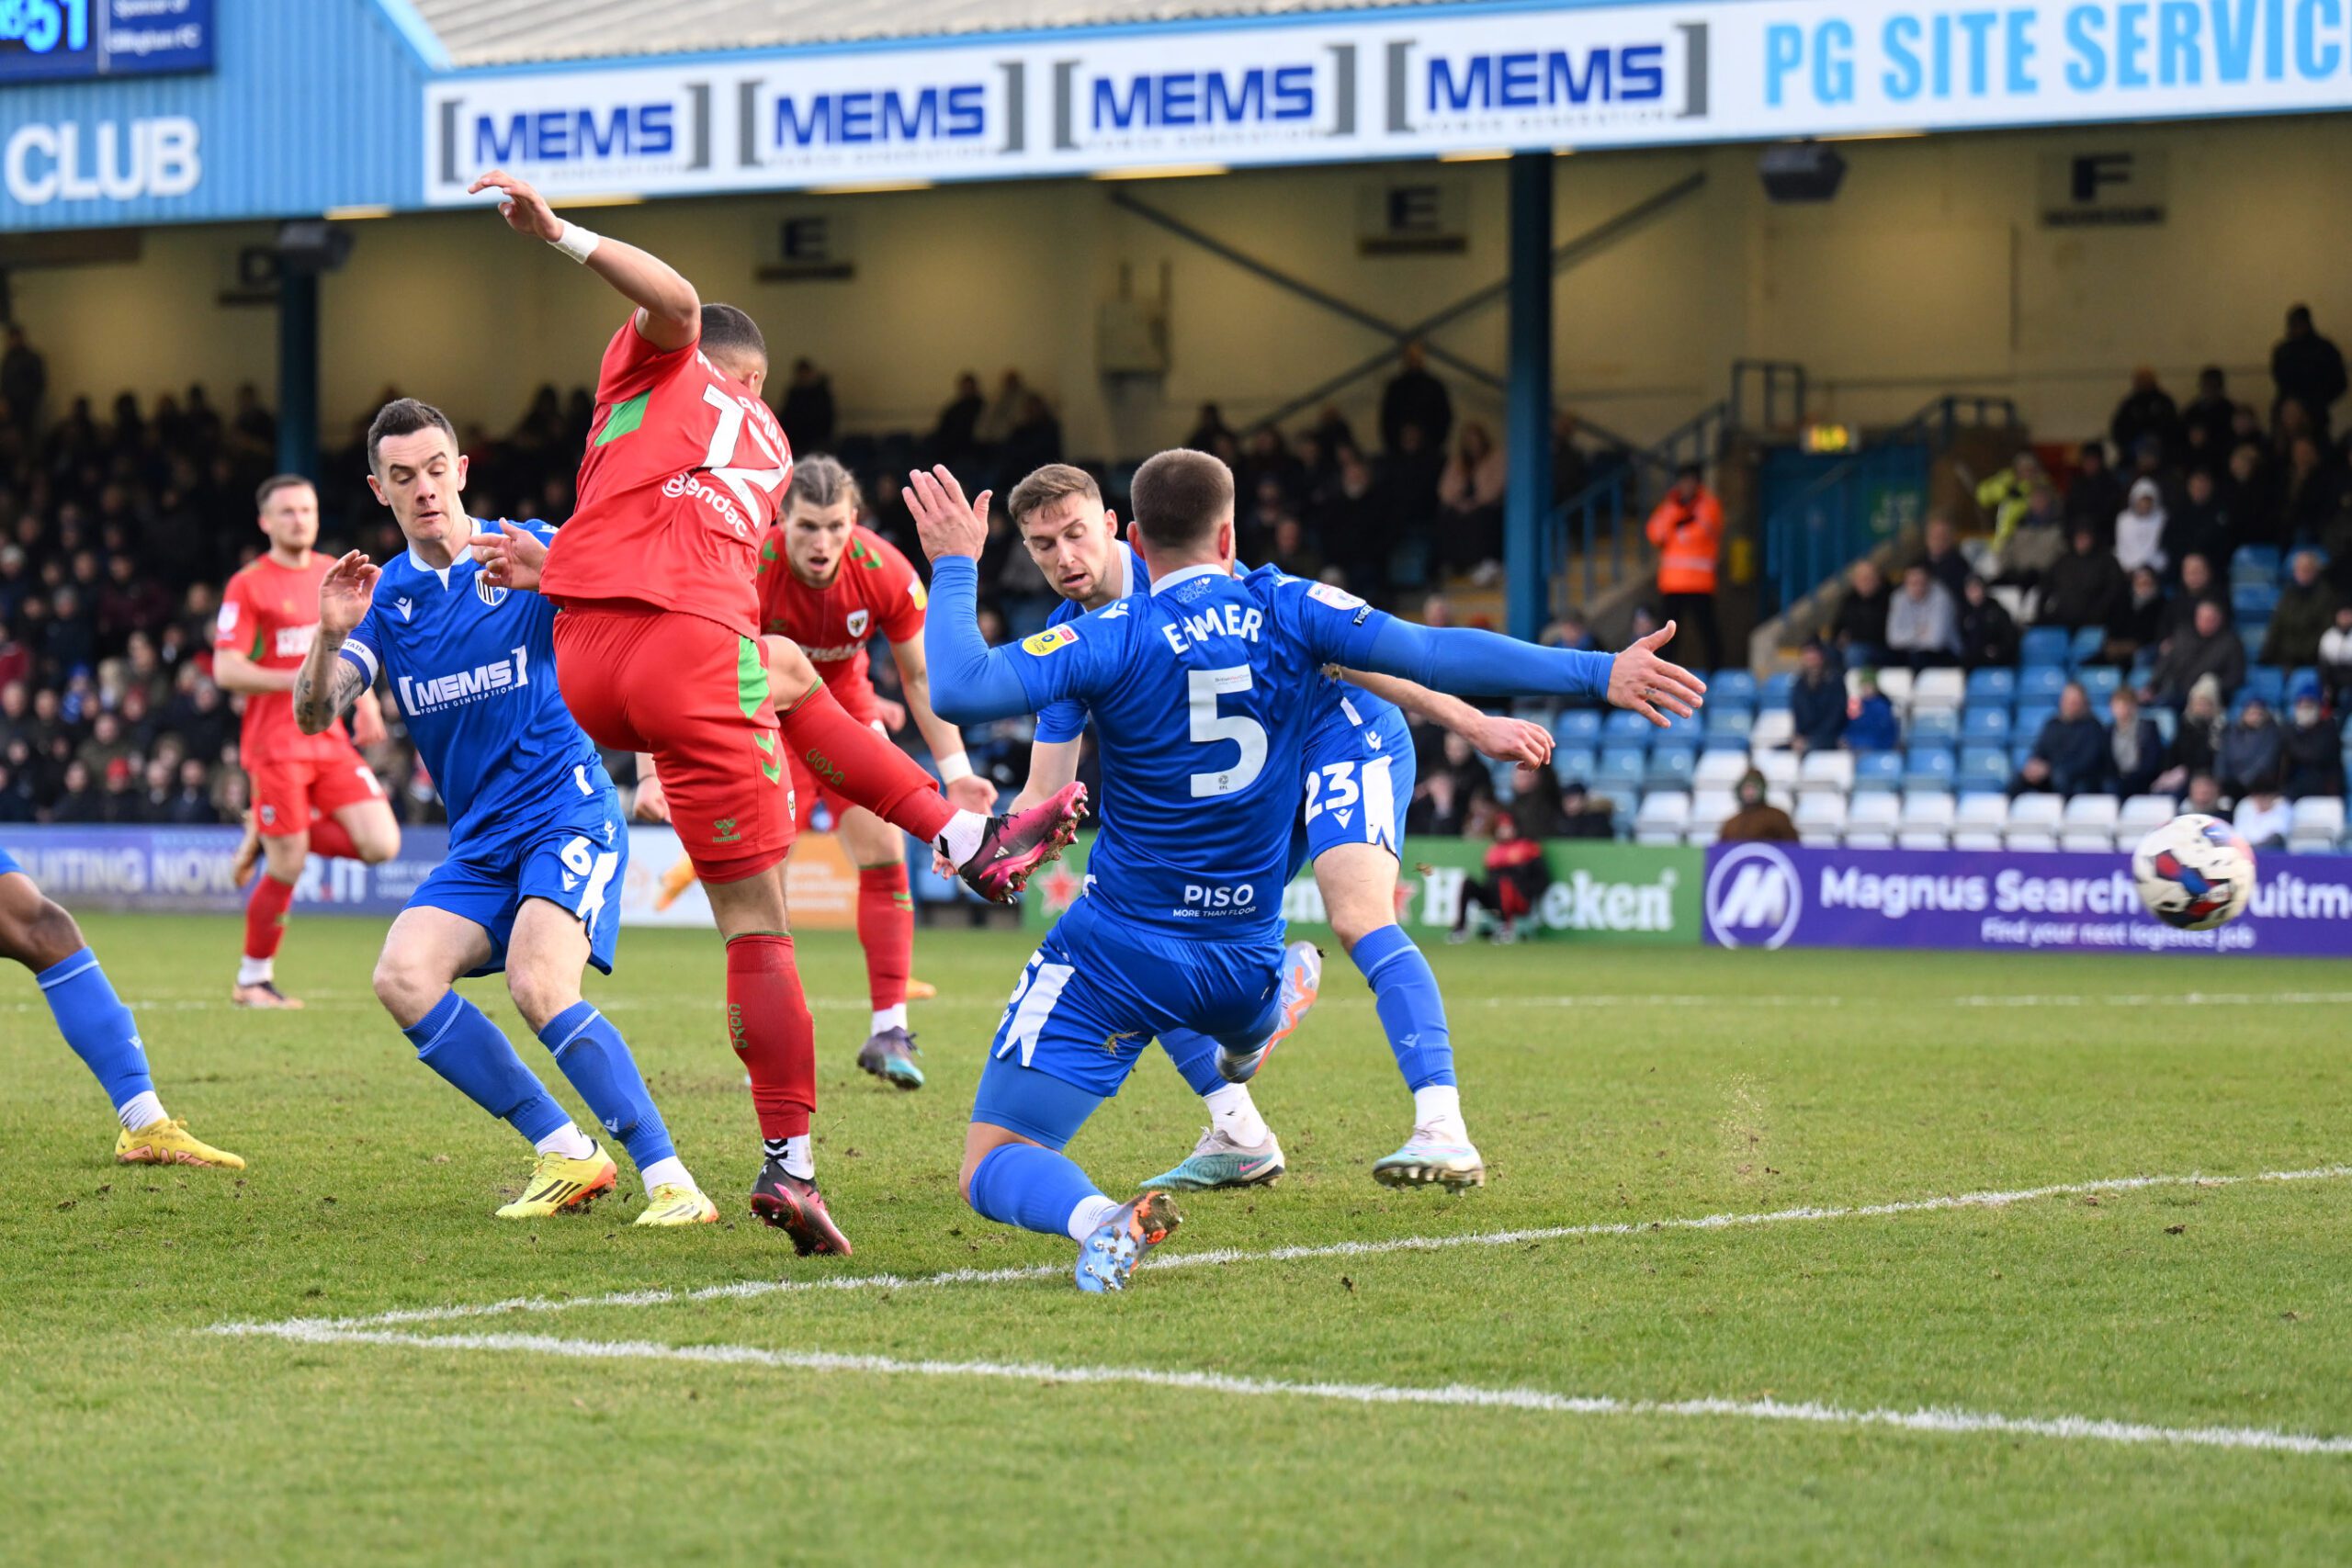 Dons boss ‘disappointed’ after defeat at Gillingham – South London News